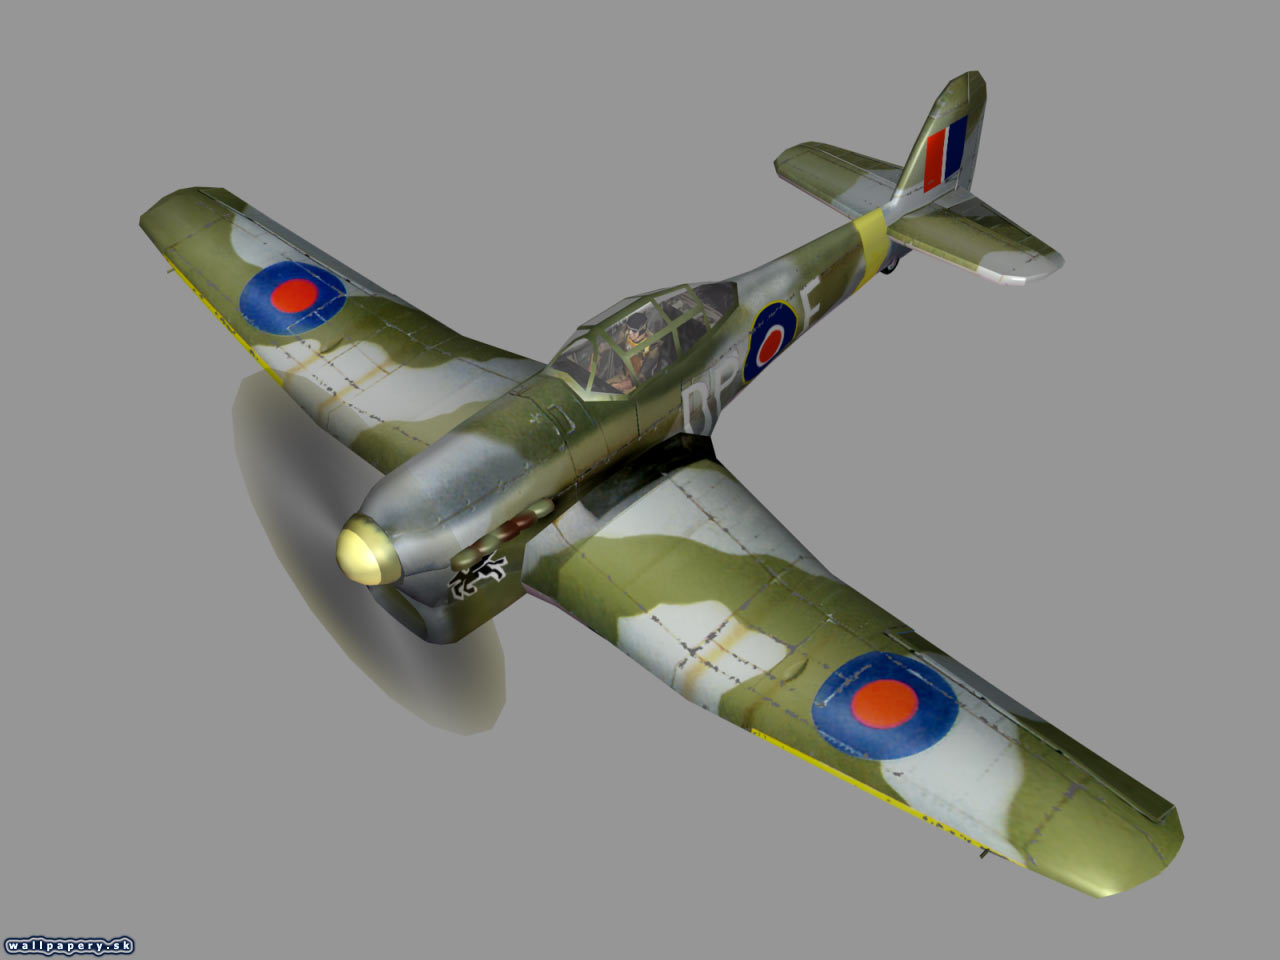 Battle of Europe - Royal Air Forces - wallpaper 1